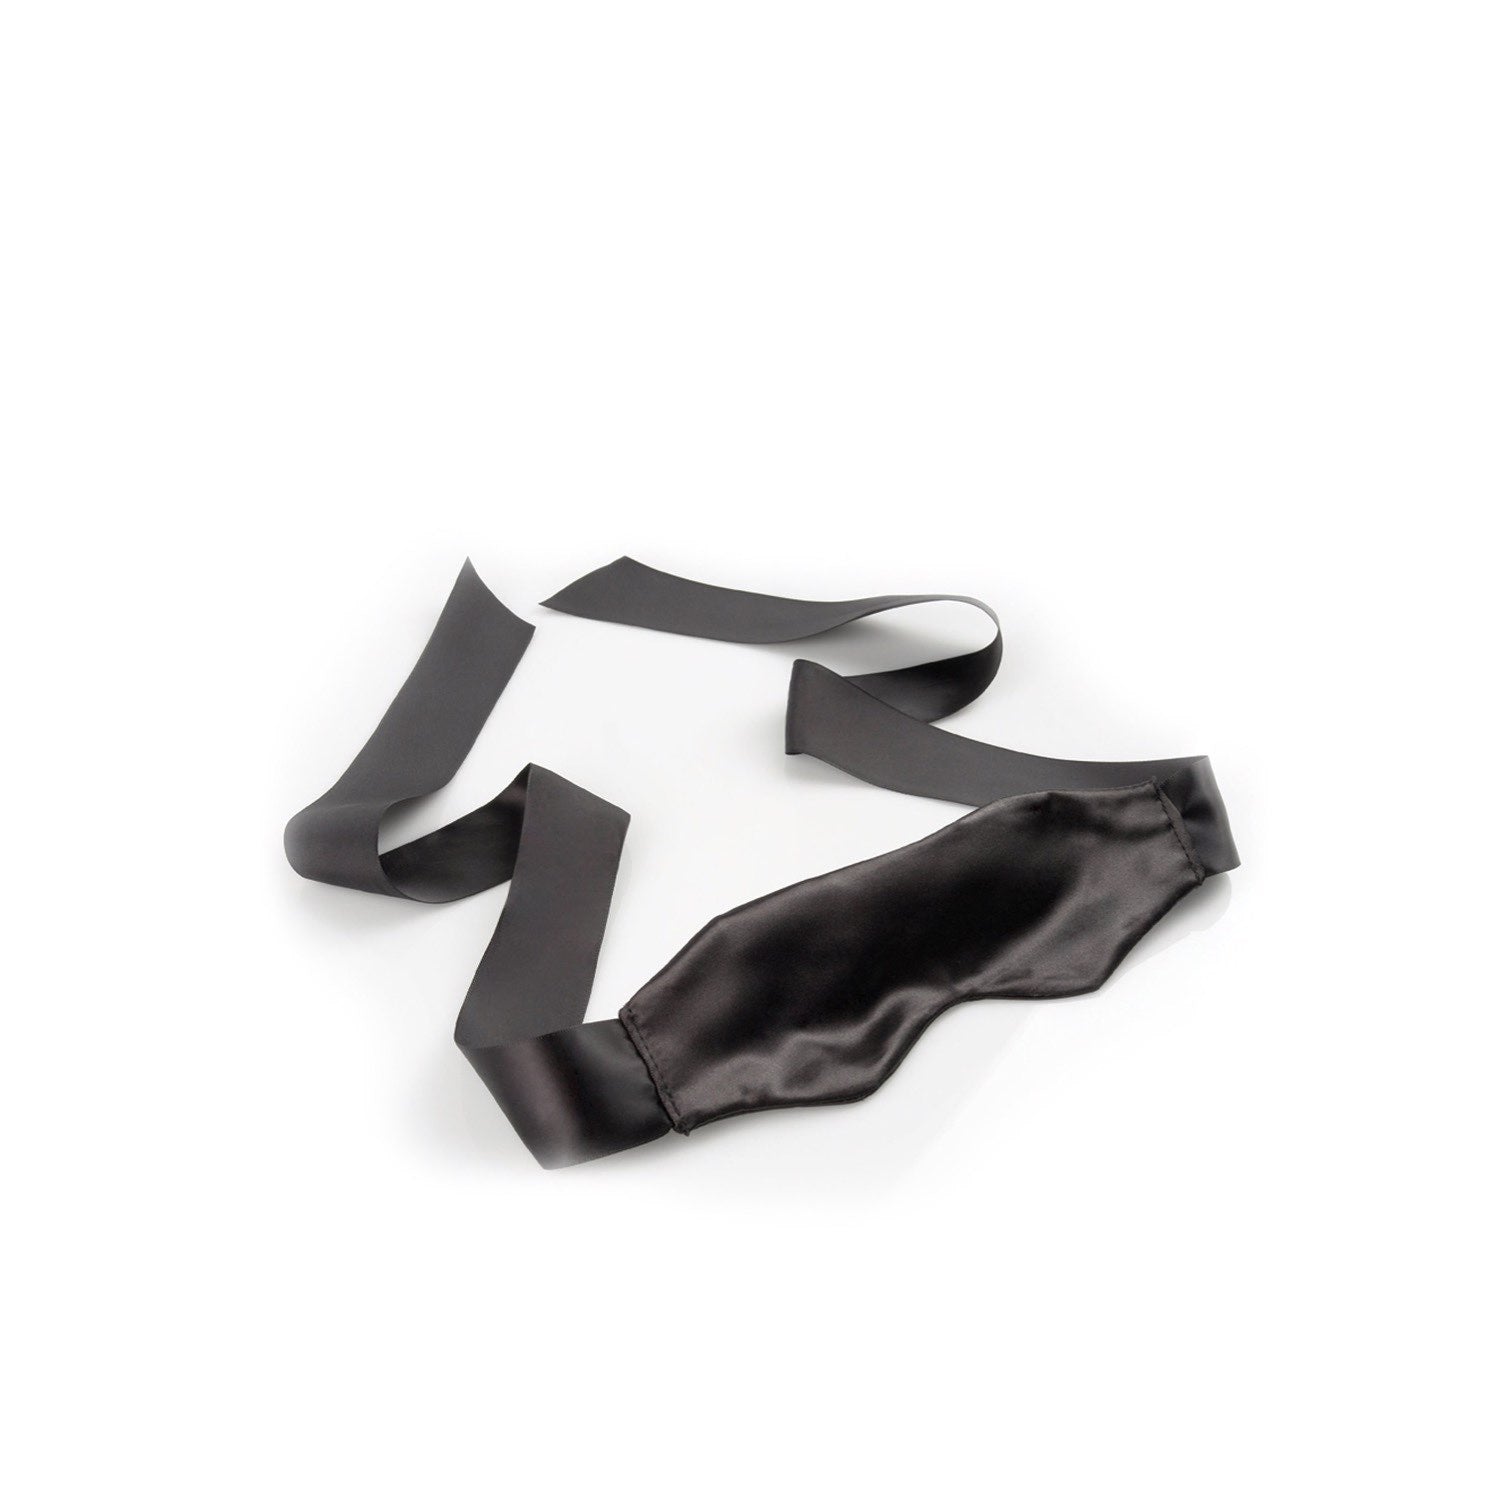 Fetish Fantasy Series Limited Edition Satin Blindfold - Black Eye Restraint by Pipedream